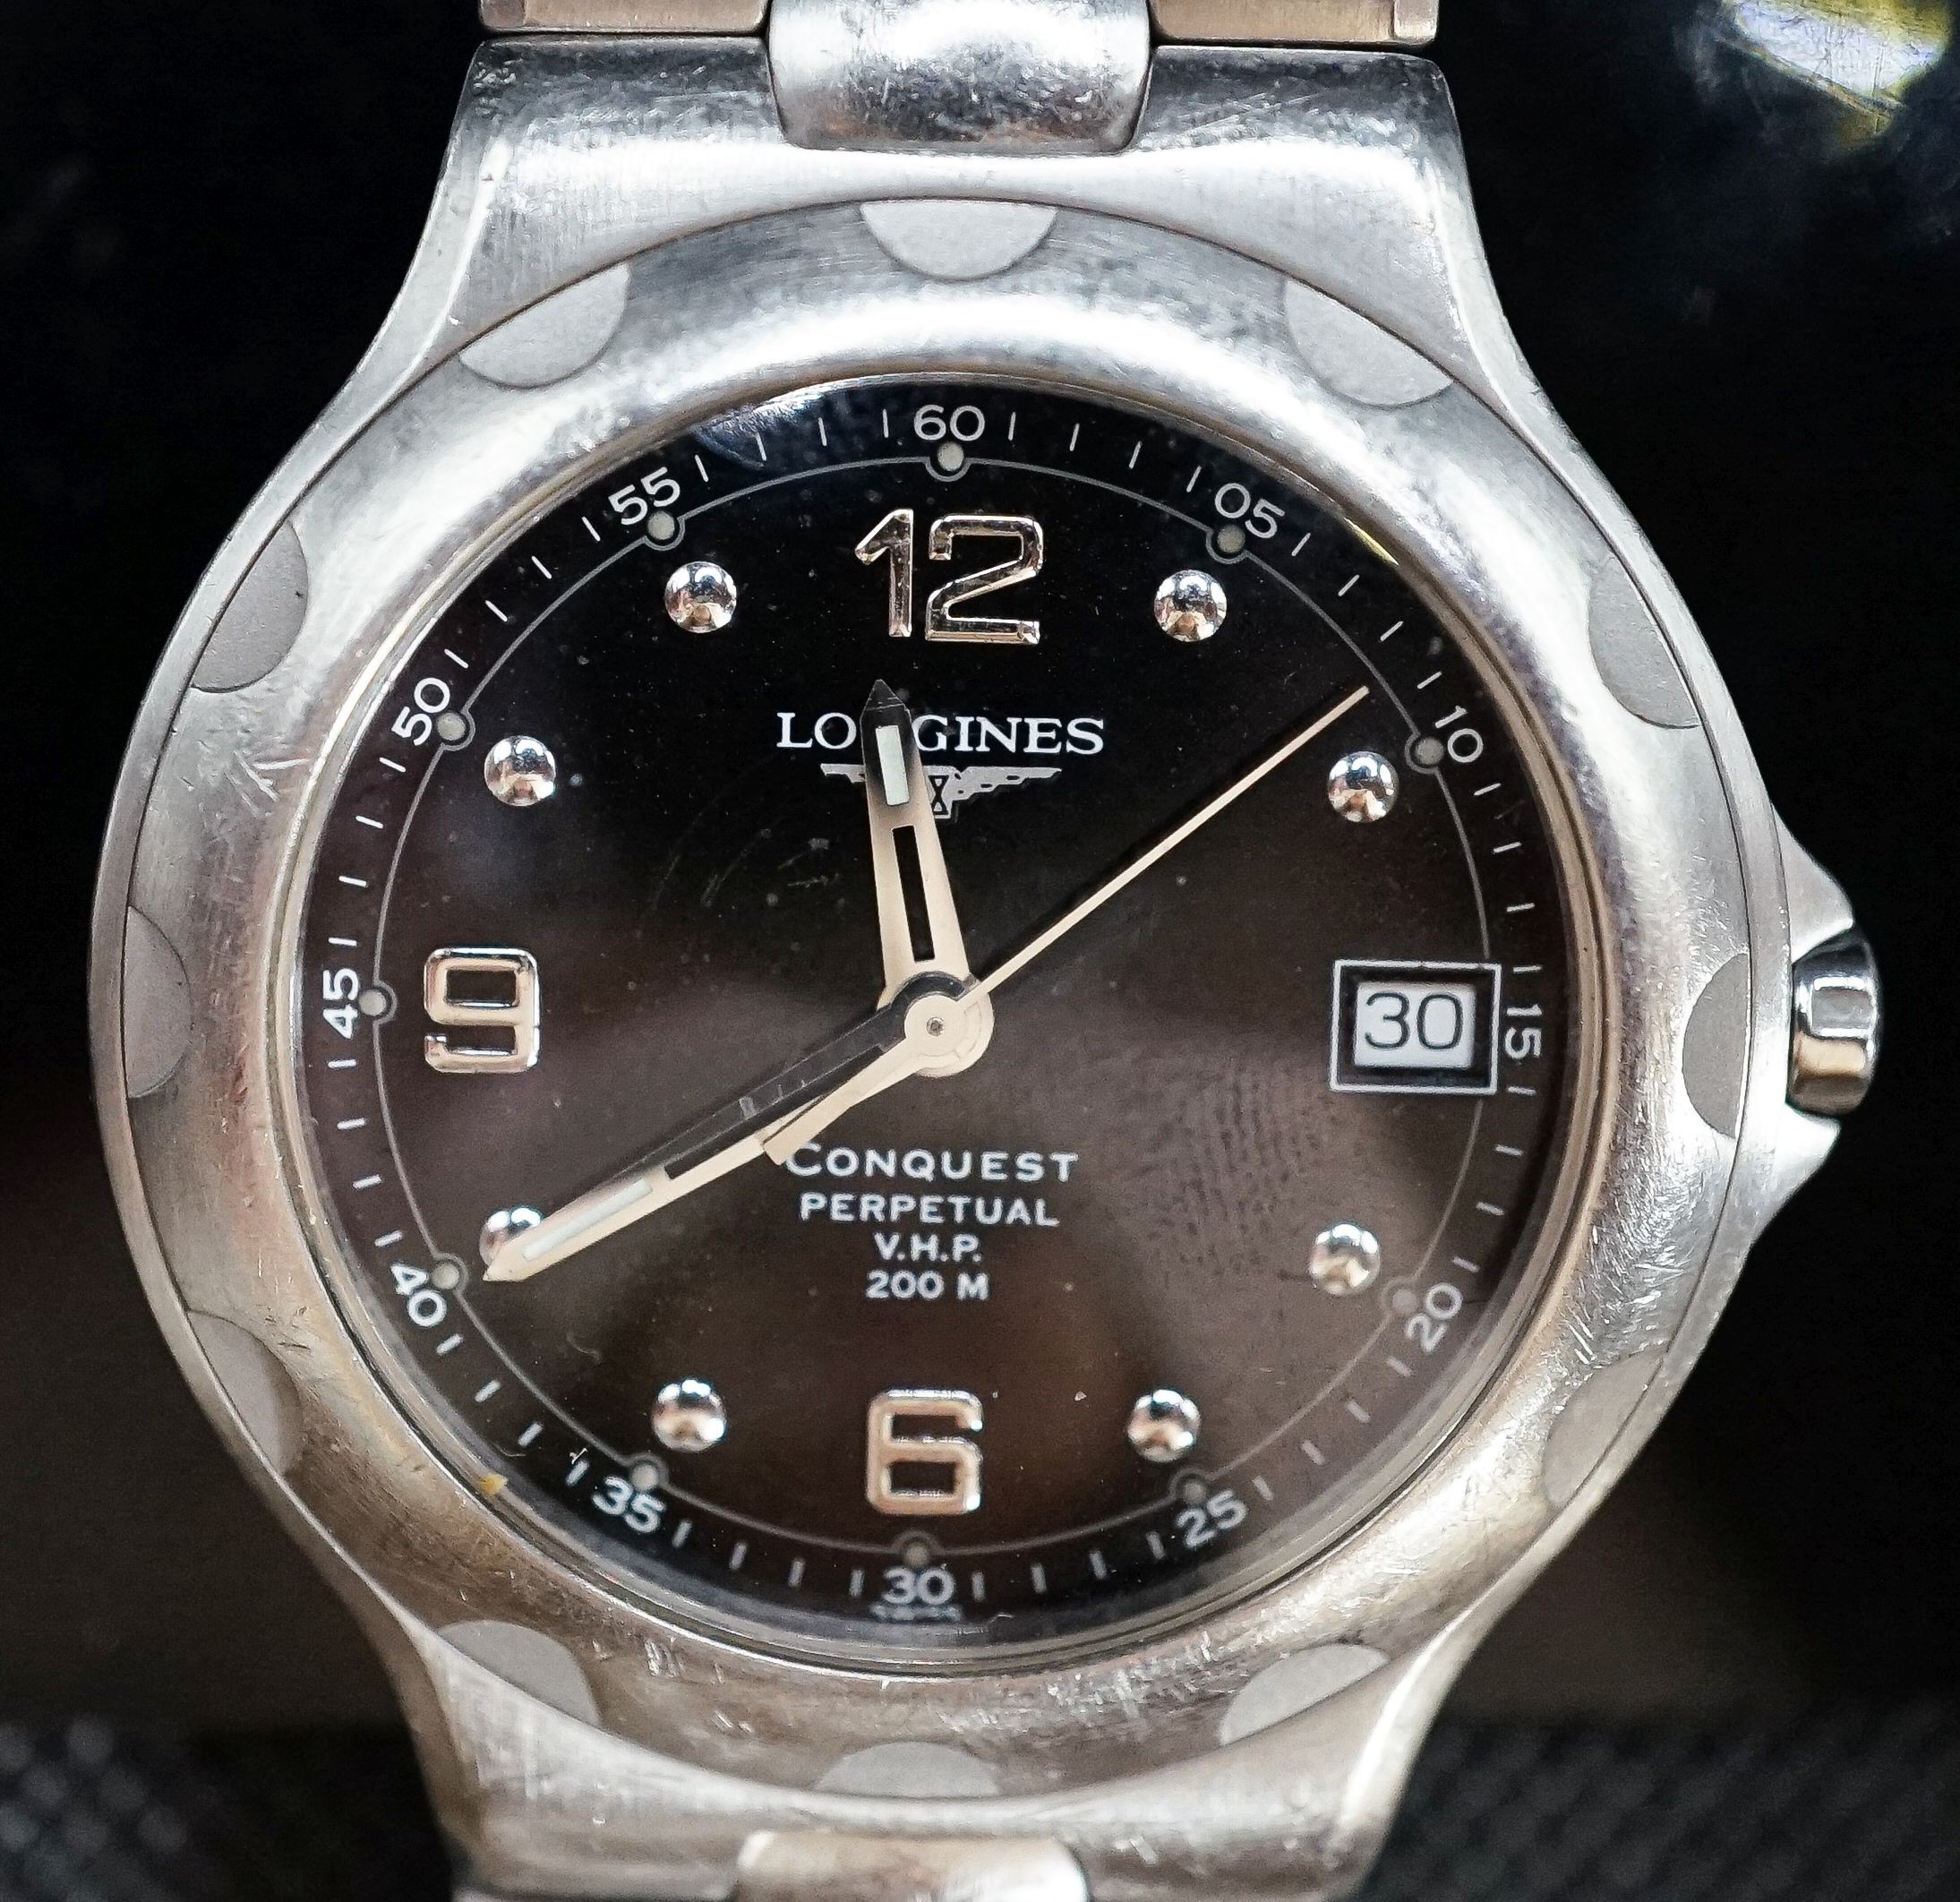 A gentleman's modern stainless steel Longines Conquest Perpetual V.H.P. wrist watch, on Longines stainless steel bracelet, case diameter 39mm.